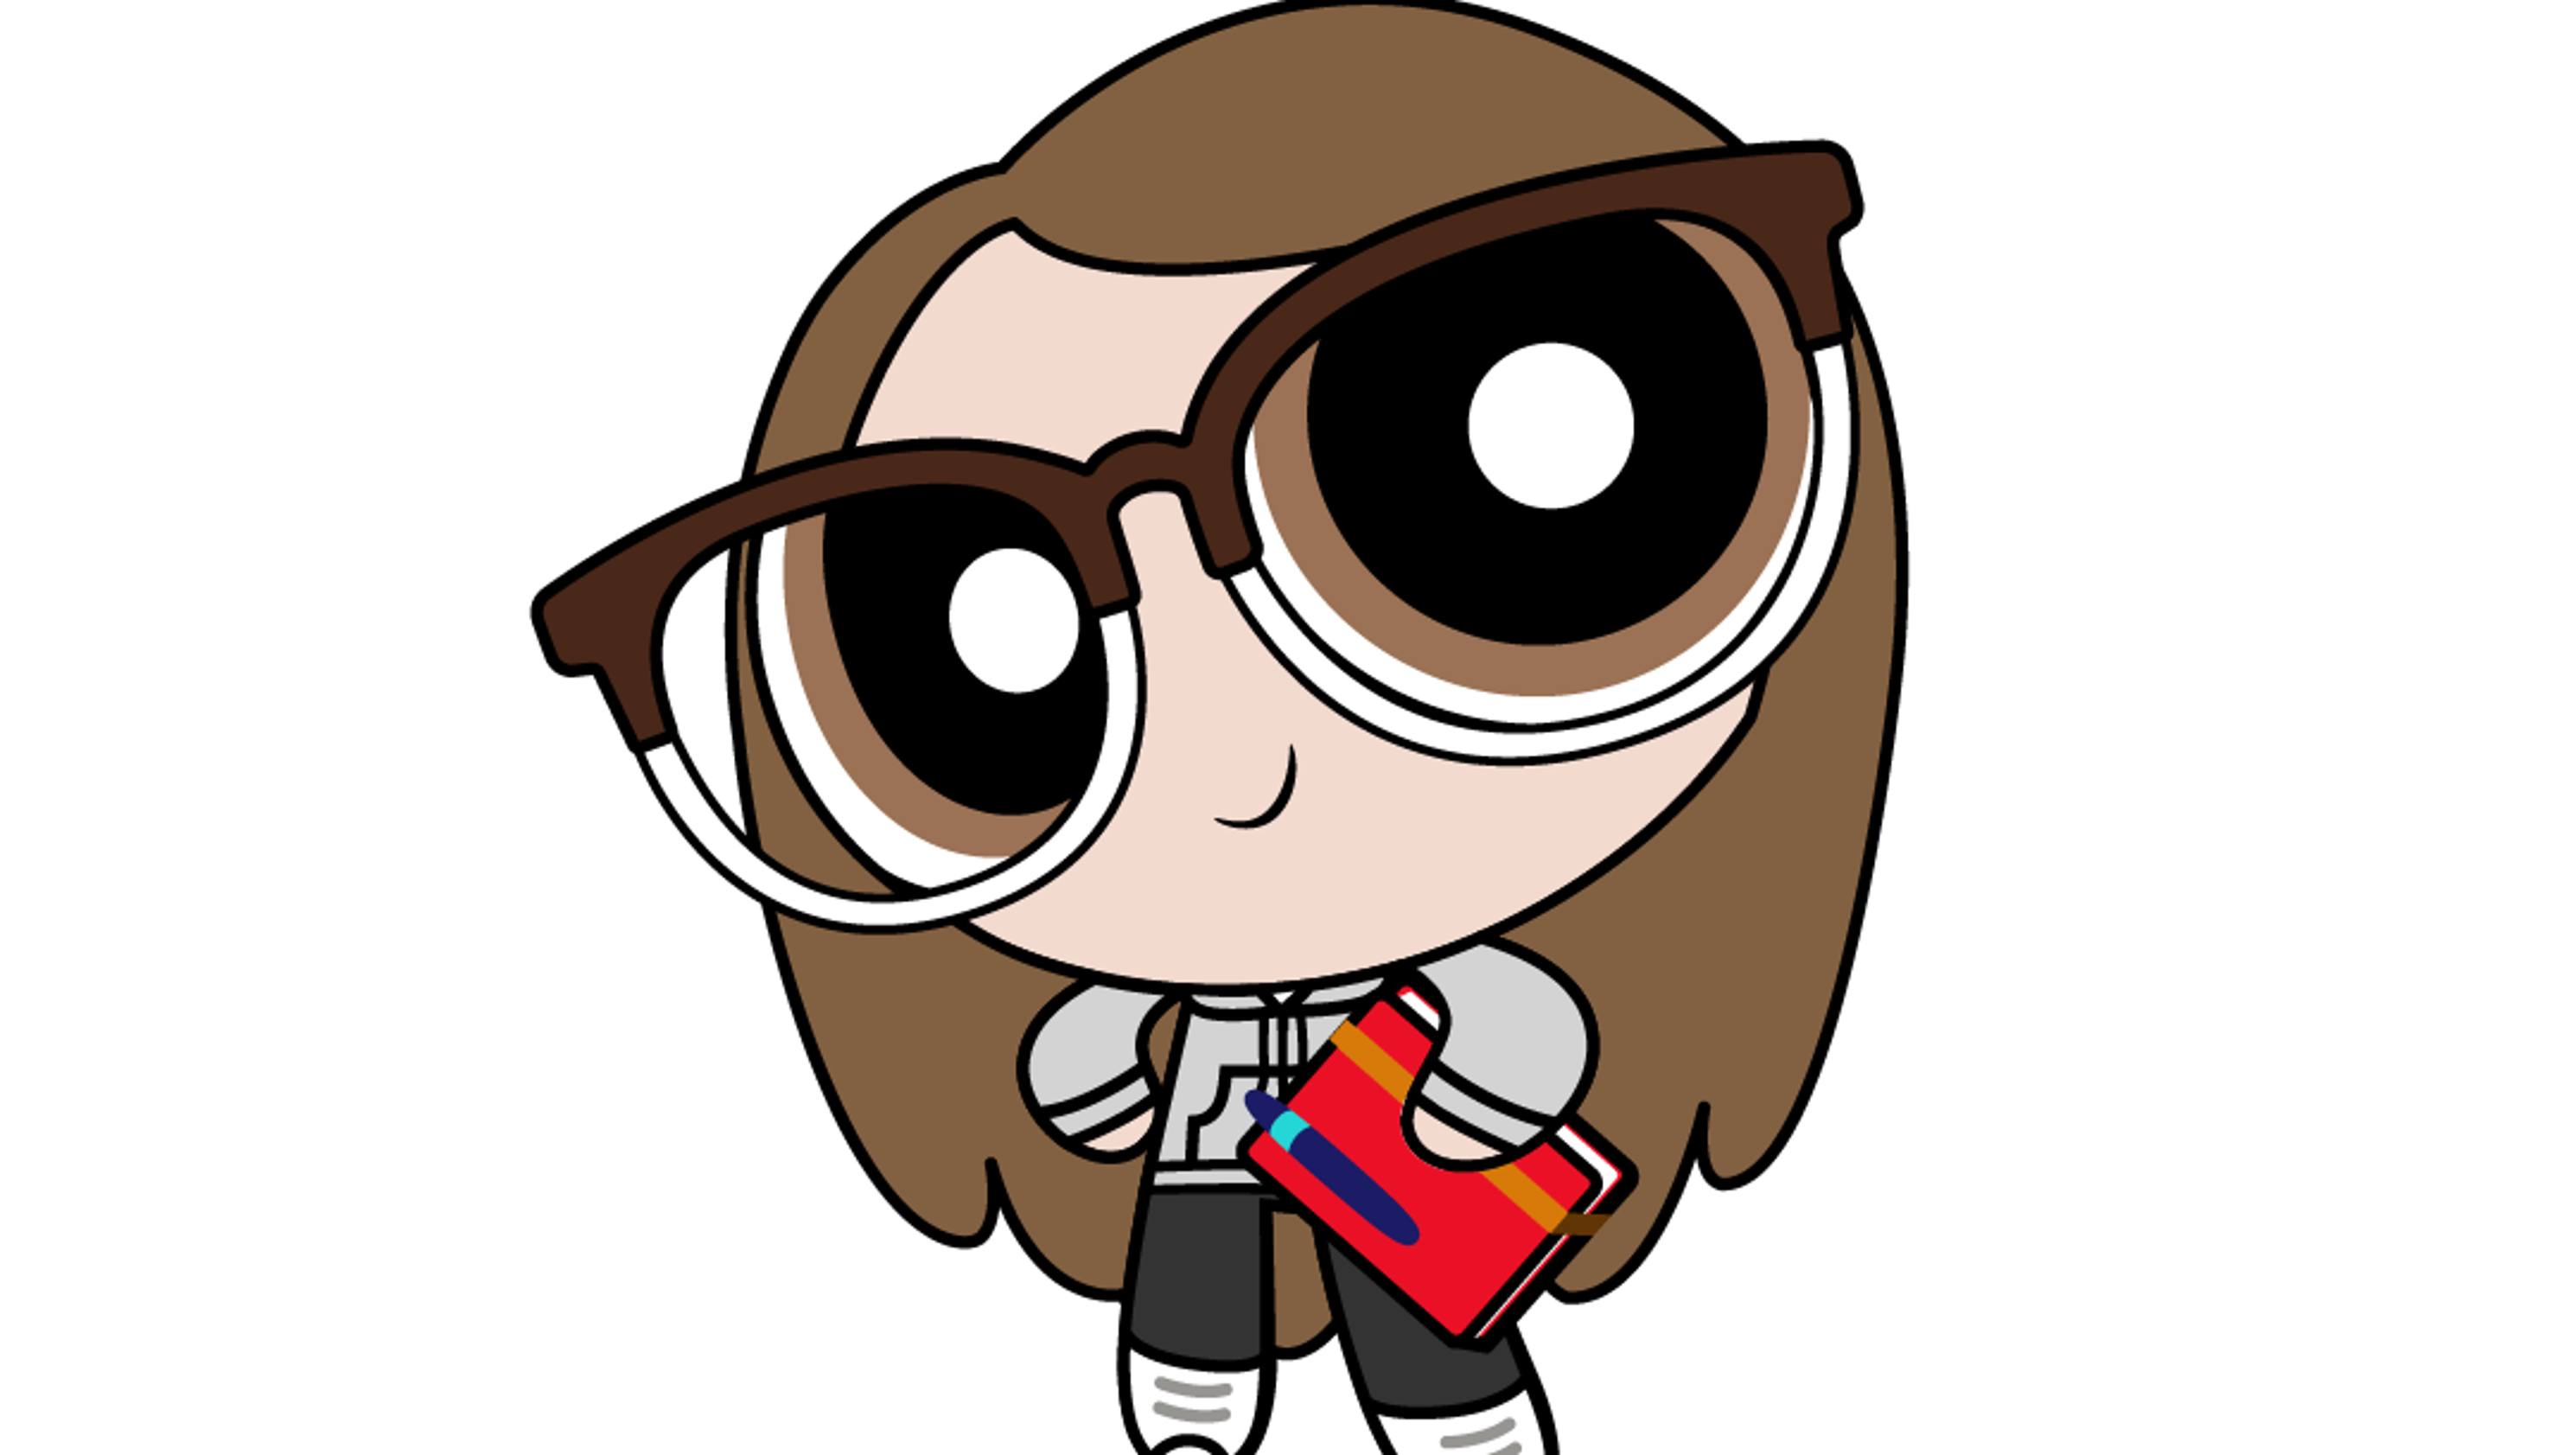 New Website Turns You Into A Powerpuff Girl